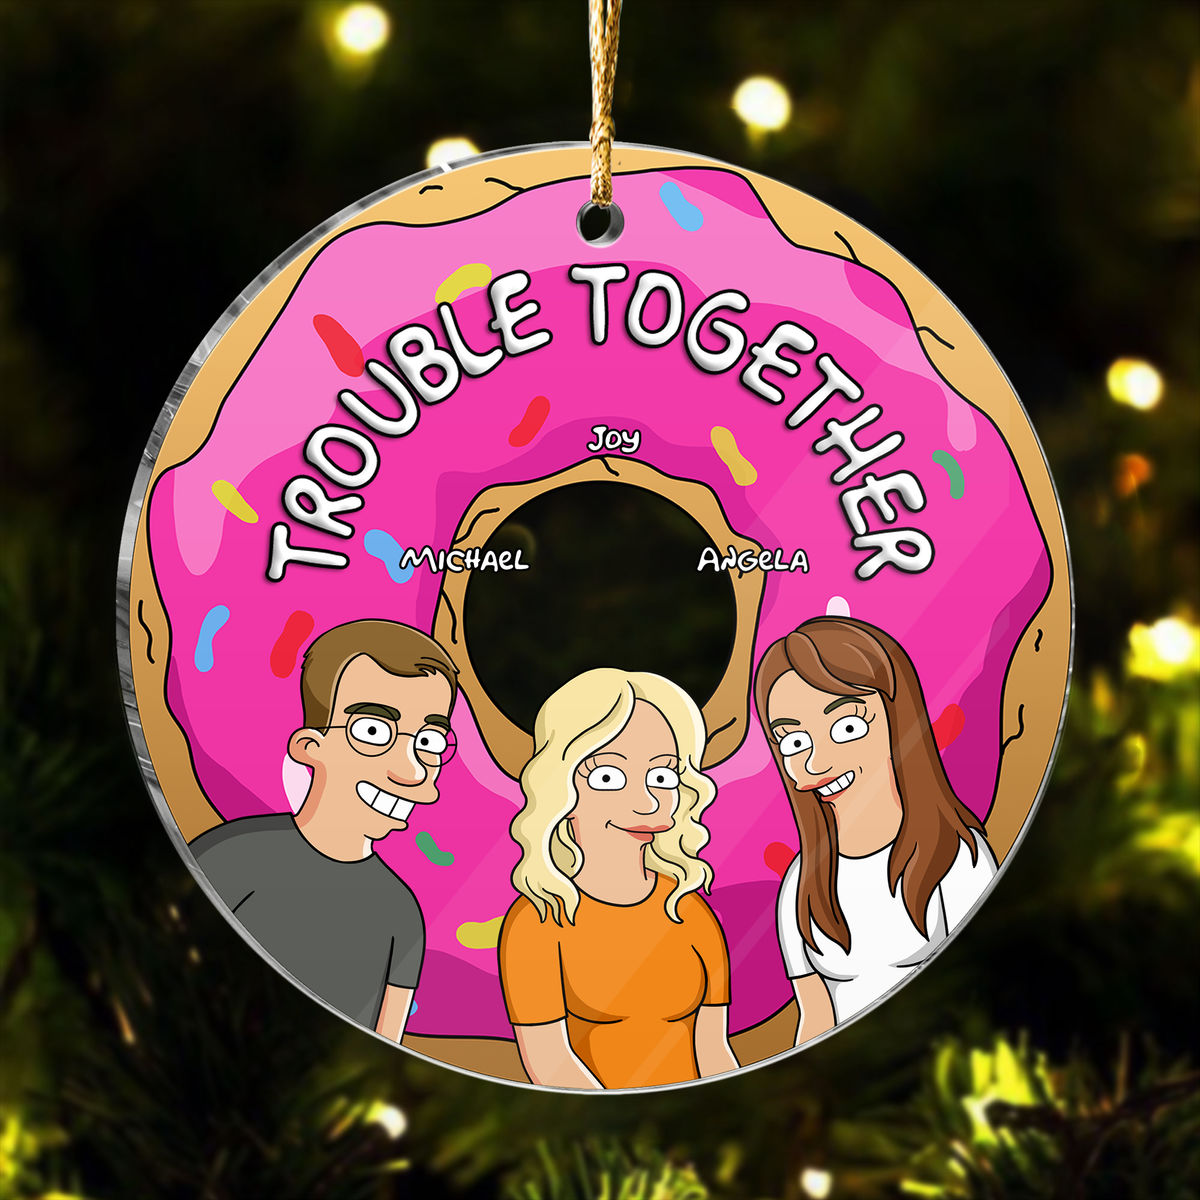 Geeky Gang - Best Coworkers Ever - Funny Christmas Gifts For Your Loved Ones - Acrylic Circle Ornament (b1)_3